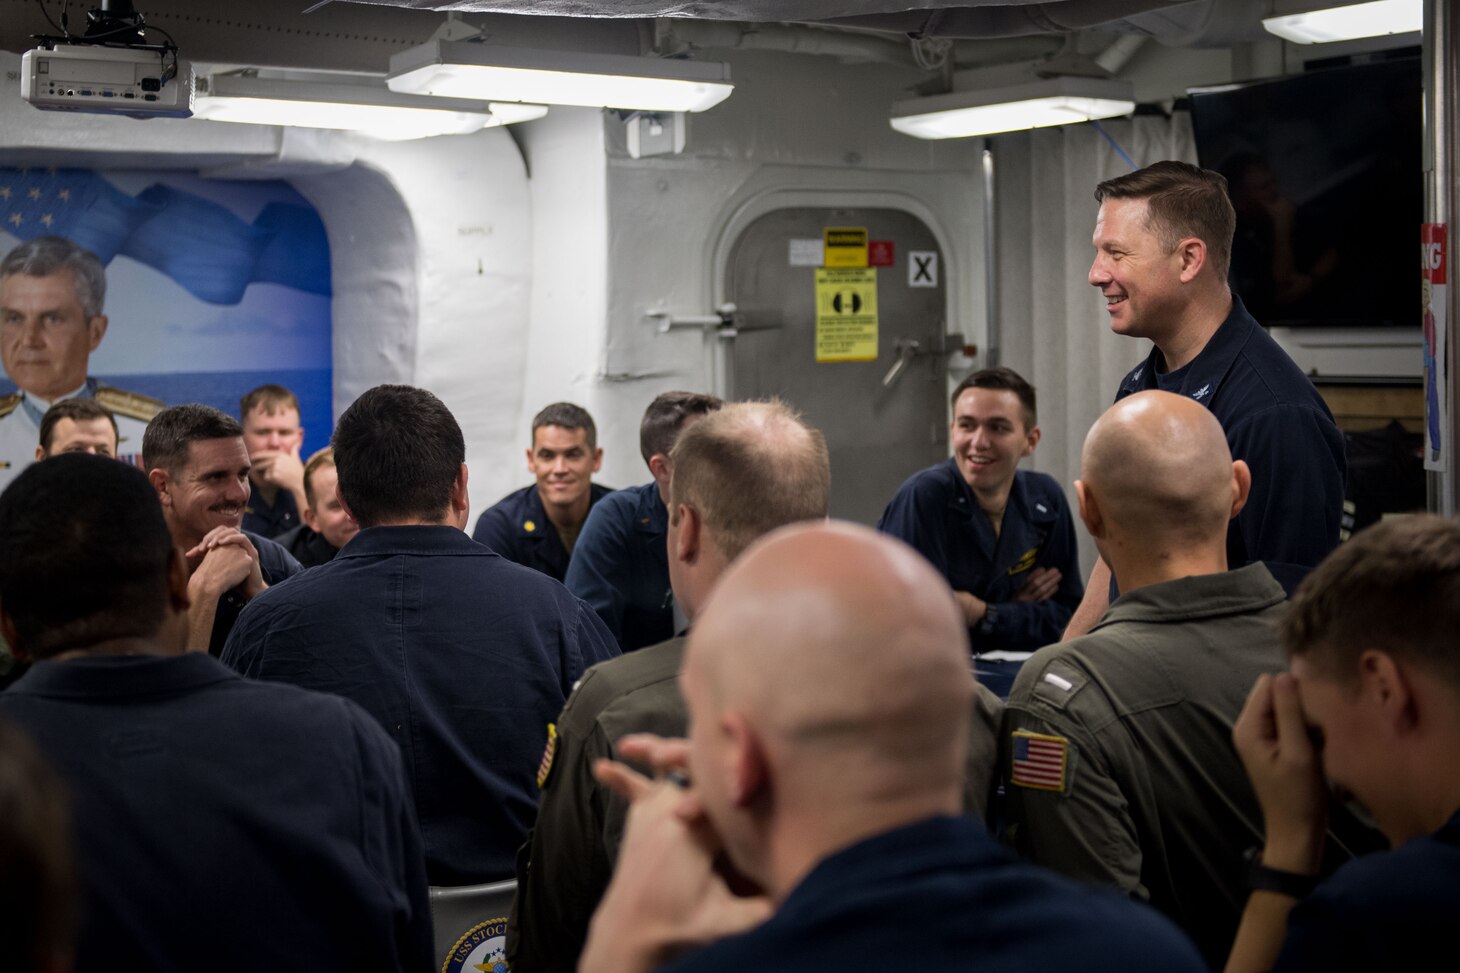 PHILLIPINE SEA (Nov. 14, 2018) Capt. Jon Duffy, commander, Destroyer Squadron (DESRON) 15, speaks with chiefs and officers aboard the Arleigh Burke-class guided-missile destroyer USS Stockdale (DDG 106) while conducting dual carrier strike group operations. Stockdale is underway with the aircraft carriers USS Ronald Reagan (CVN 76) and USS John C. Stennis (CVN 74) conducting operations in international waters as part of dual carrier strike force operations. The U.S. Navy has patrolled the Indo-Pacific region routinely for more than 70 years promoting regional security, stability and prosperity